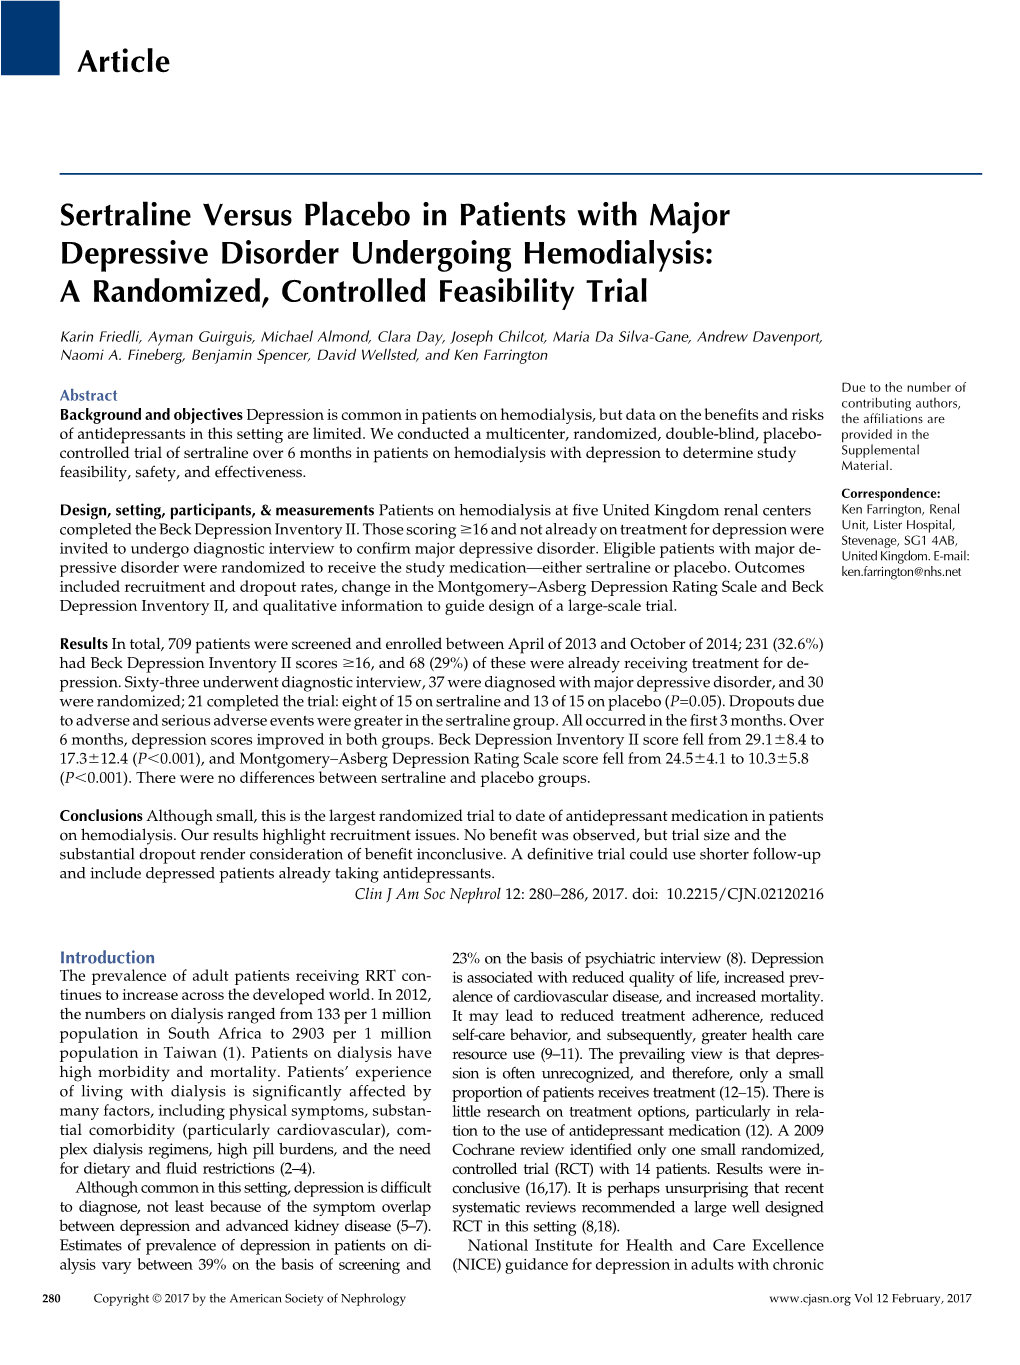 Sertraline Versus Placebo in Patients with Major Depressive Disorder Undergoing Hemodialysis: a Randomized, Controlled Feasibility Trial